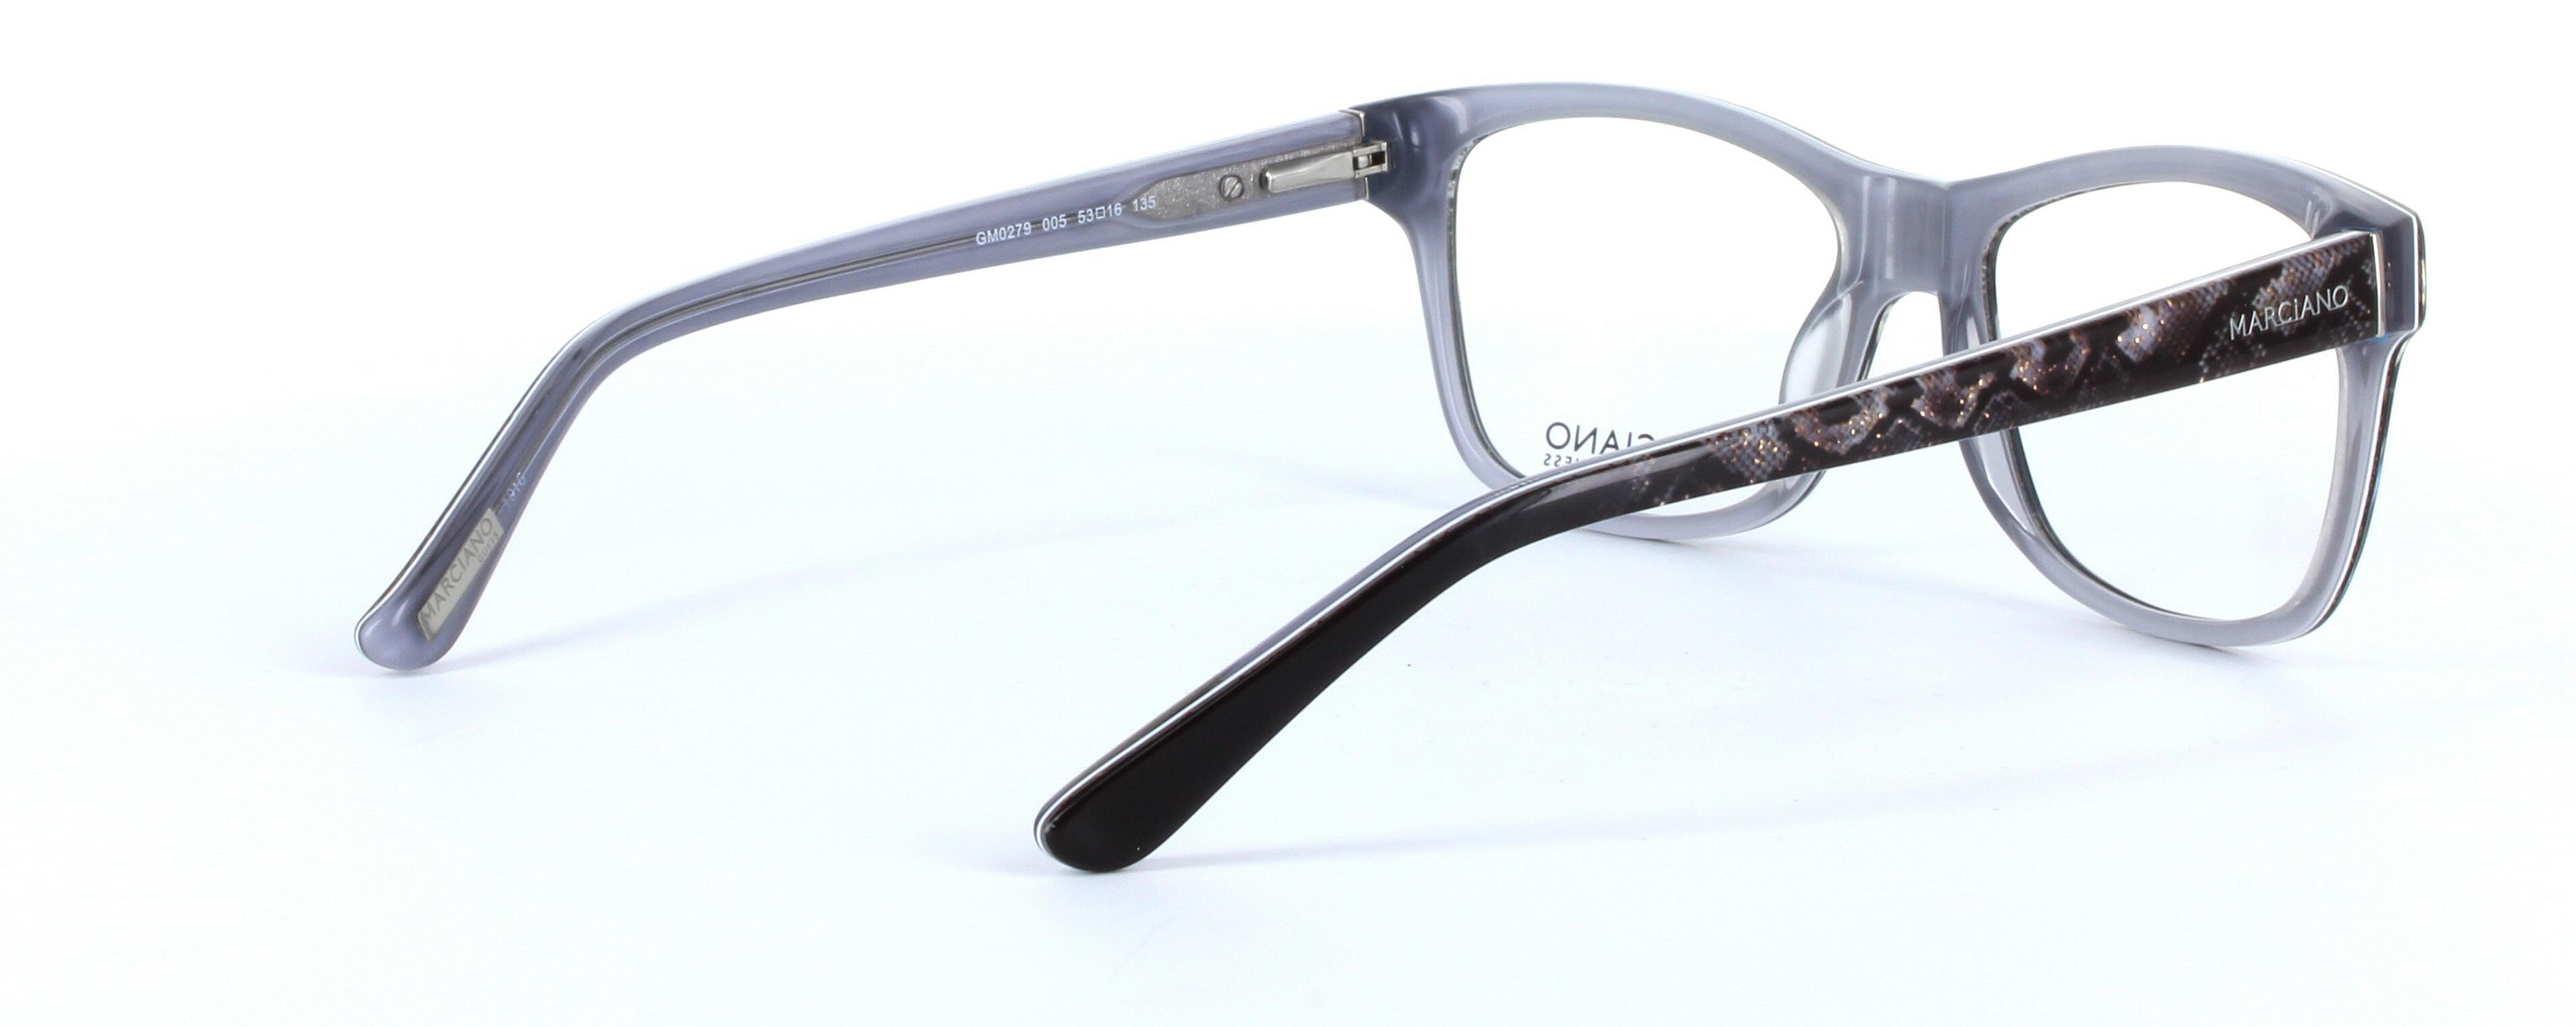 GUESS MARCIANO (GM0279-005) Black Full Rim Oval Rectangular Acetate Glasses - Image View 4